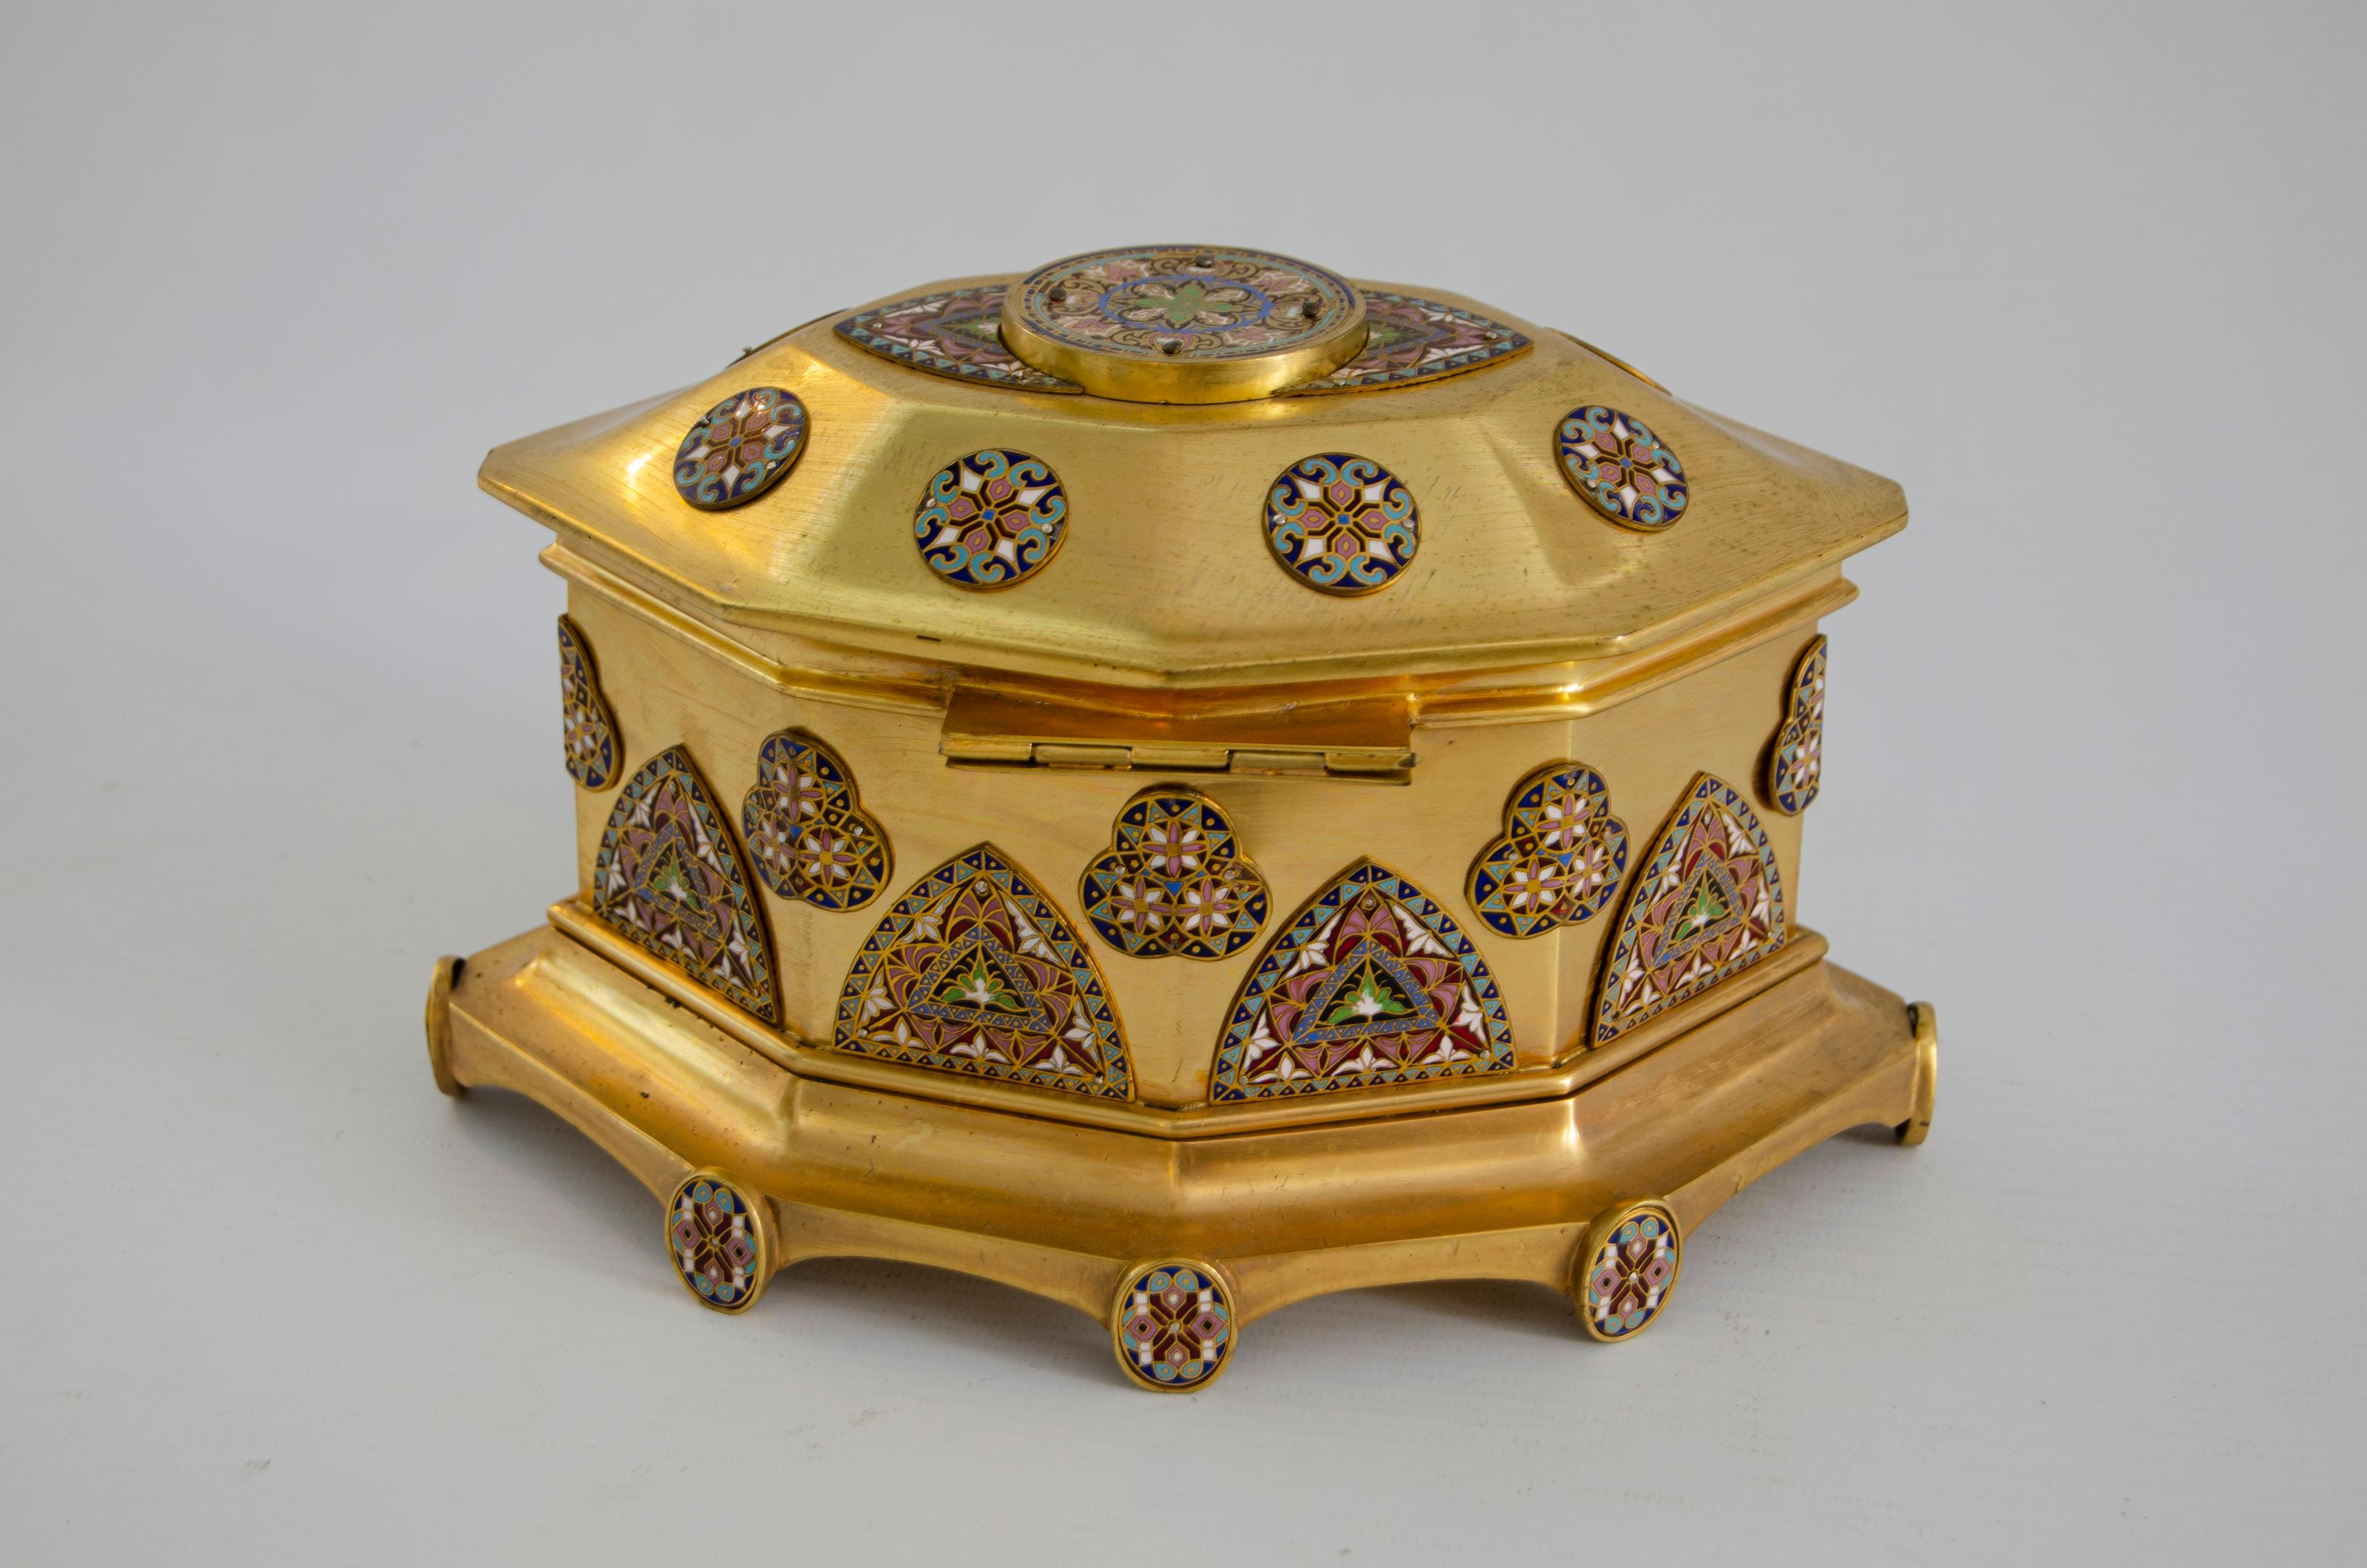 Napoleon III jewelery box
Bonce gold and enamel
origin France in perfect condition
inside it was reupholstered
circa 1900.
The Napoleon III style had its heyday during the 1850s and 1880s. Emperor Napoleon wanted to emulate the lavishness and